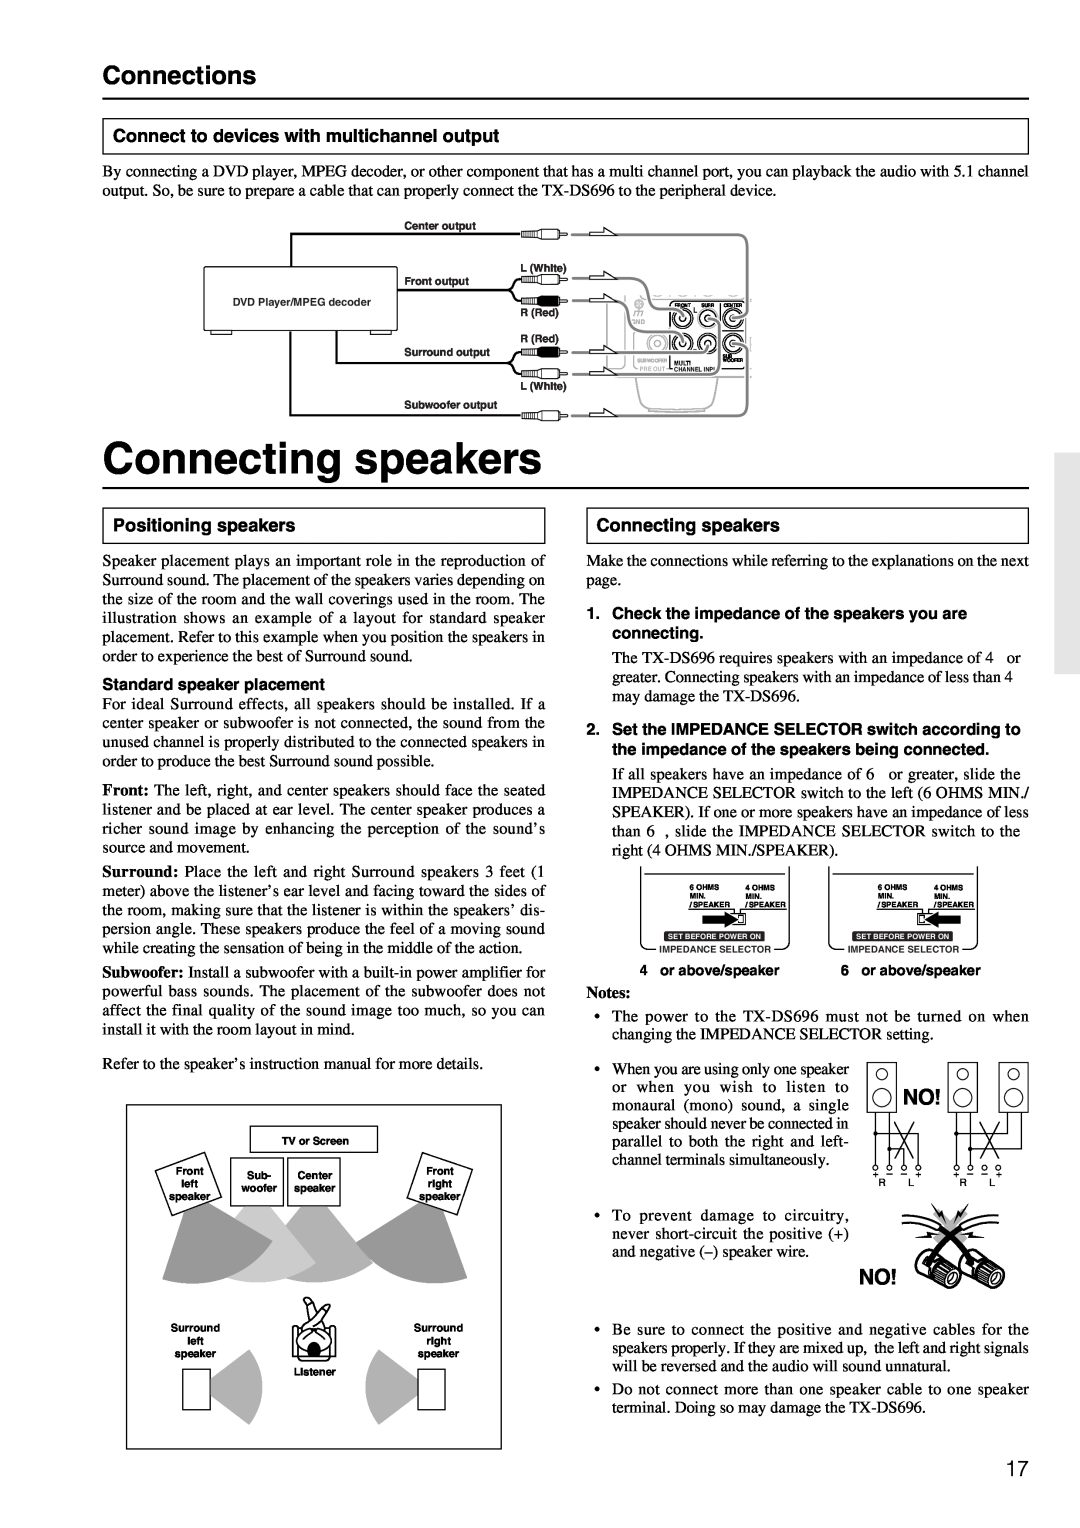 Onkyo TX-DS696 appendix Connecting speakers, Connections, Connect to devices with multichannel output, Positioning speakers 